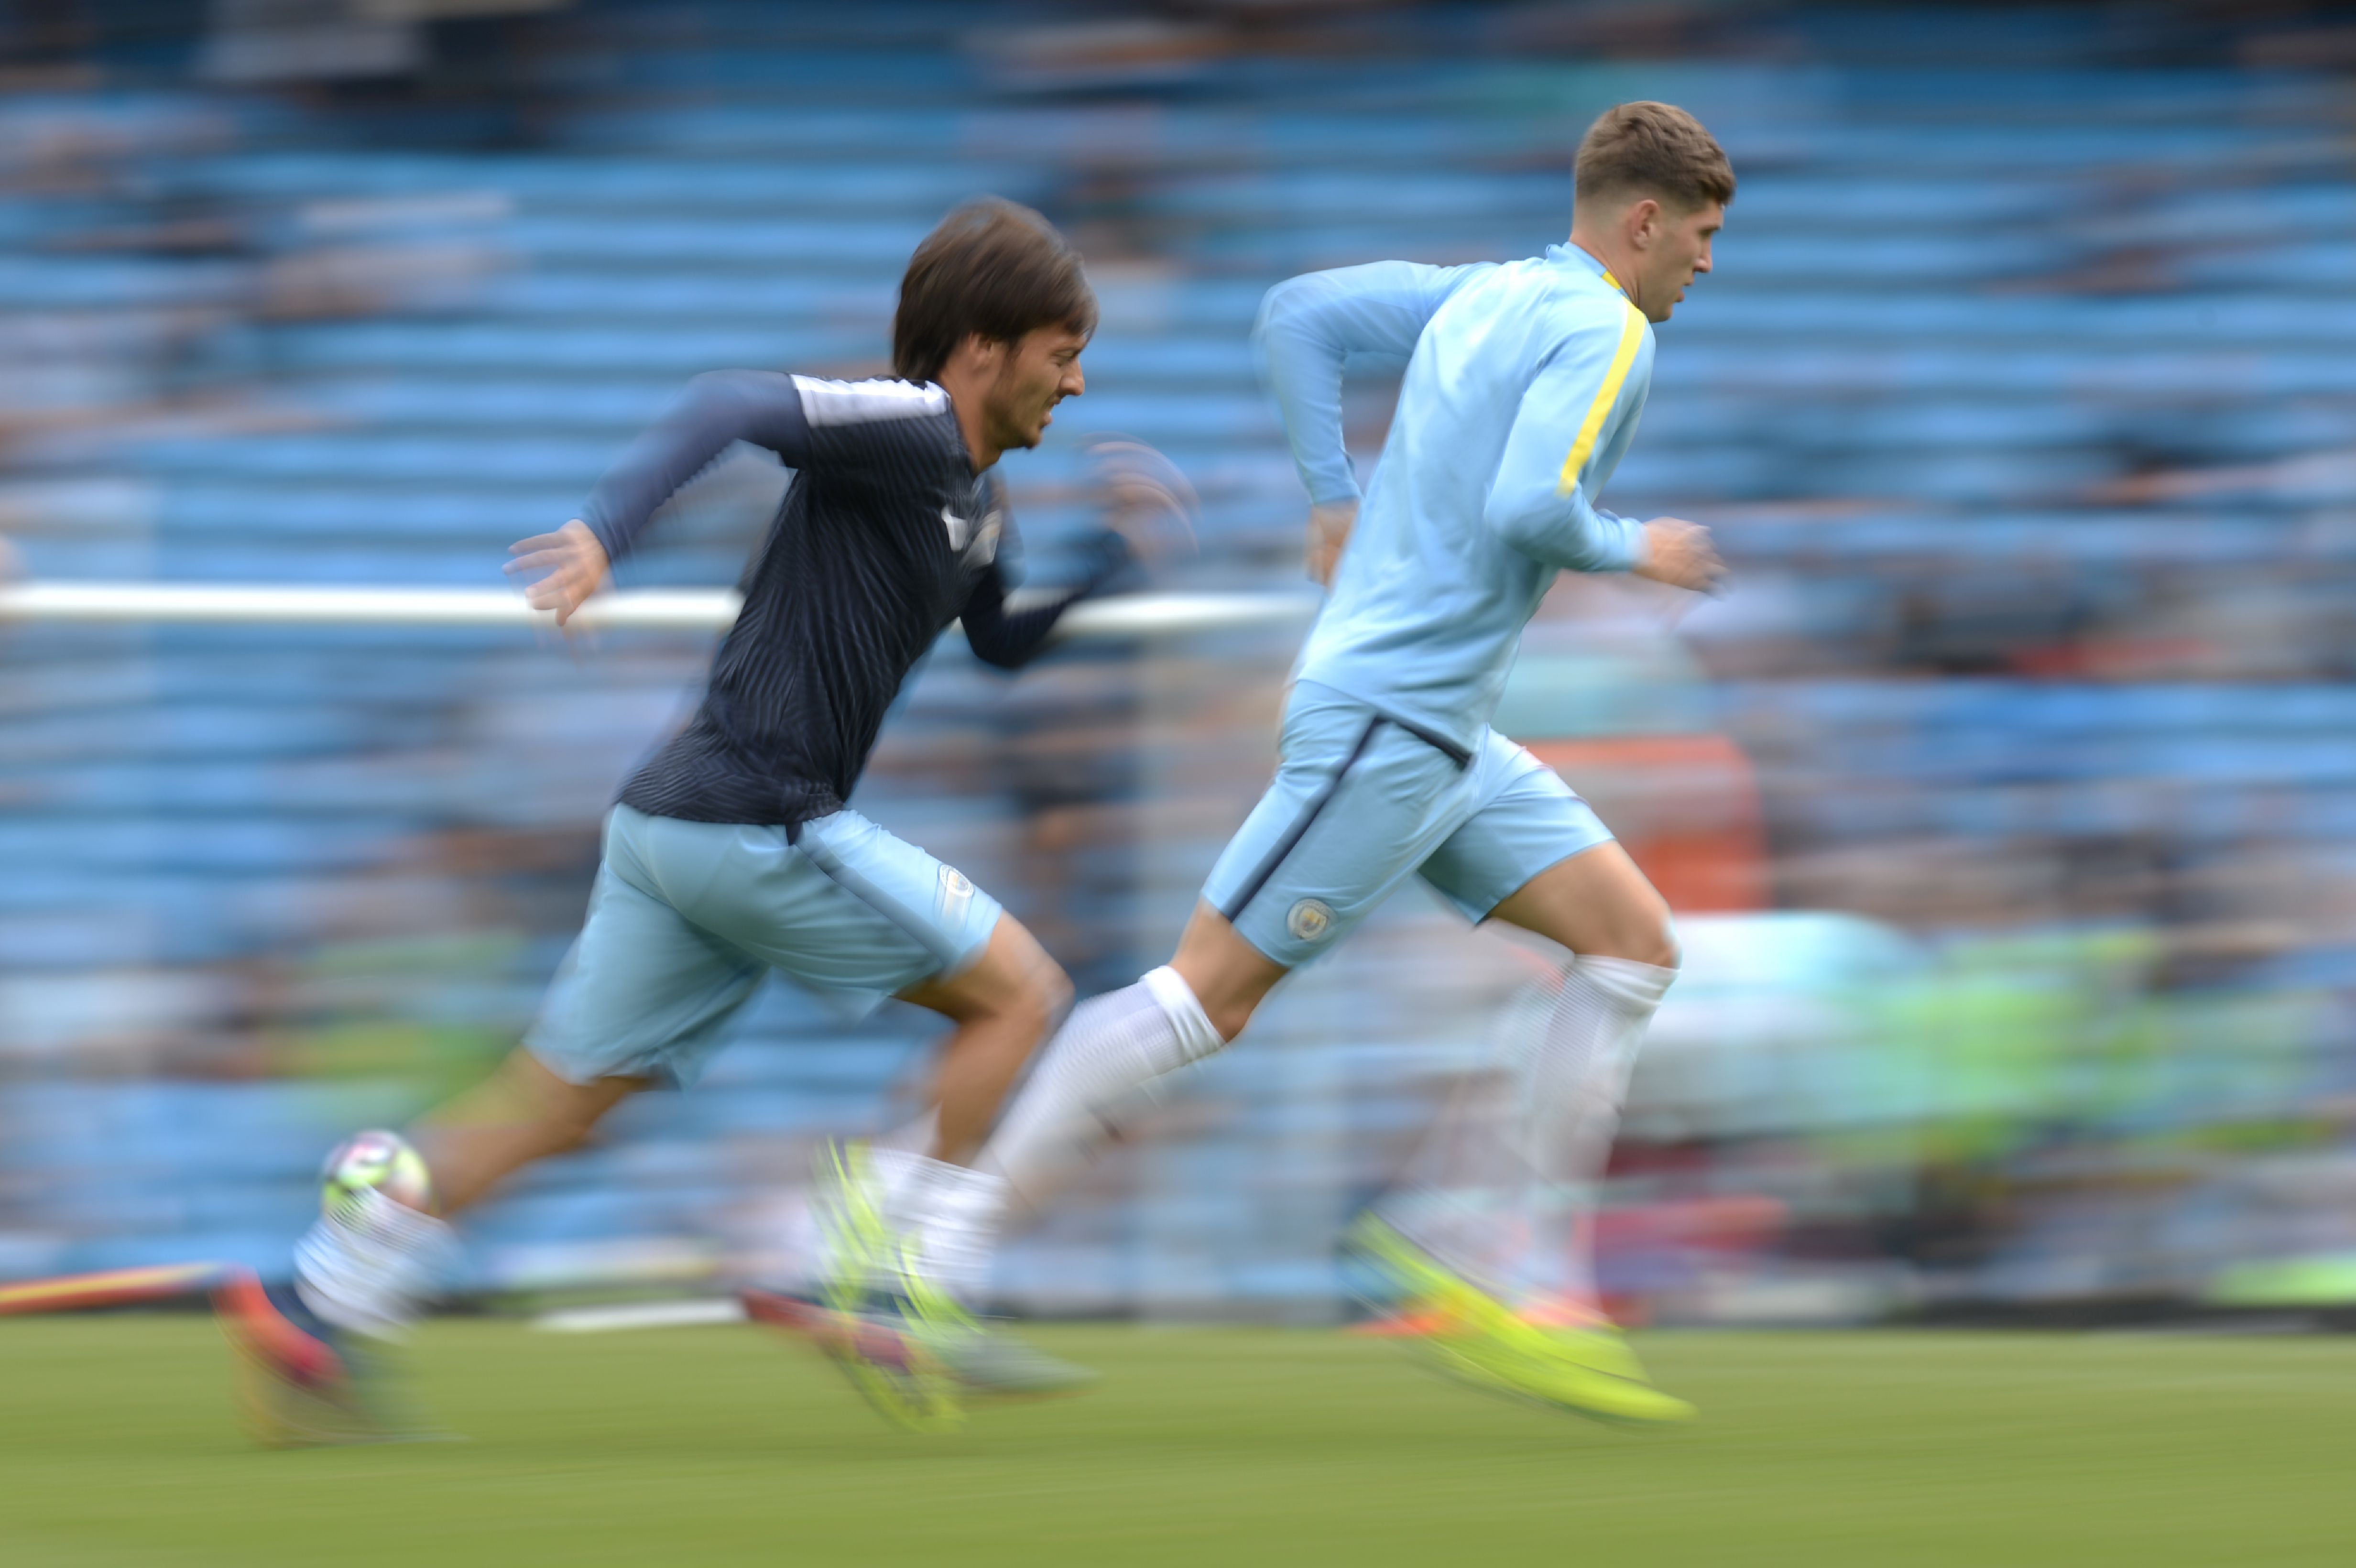 Manchester City's Spanish midfielder David Silva (L) and Manchester City's English defender John Stones warm up before the English Premier League football match between Manchester City and West Ham United at the Etihad Stadium in Manchester, north west England, on August 28, 2016. / AFP / OLI SCARFF / RESTRICTED TO EDITORIAL USE. No use with unauthorized audio, video, data, fixture lists, club/league logos or 'live' services. Online in-match use limited to 75 images, no video emulation. No use in betting, games or single club/league/player publications.  /         (Photo credit should read OLI SCARFF/AFP/Getty Images)